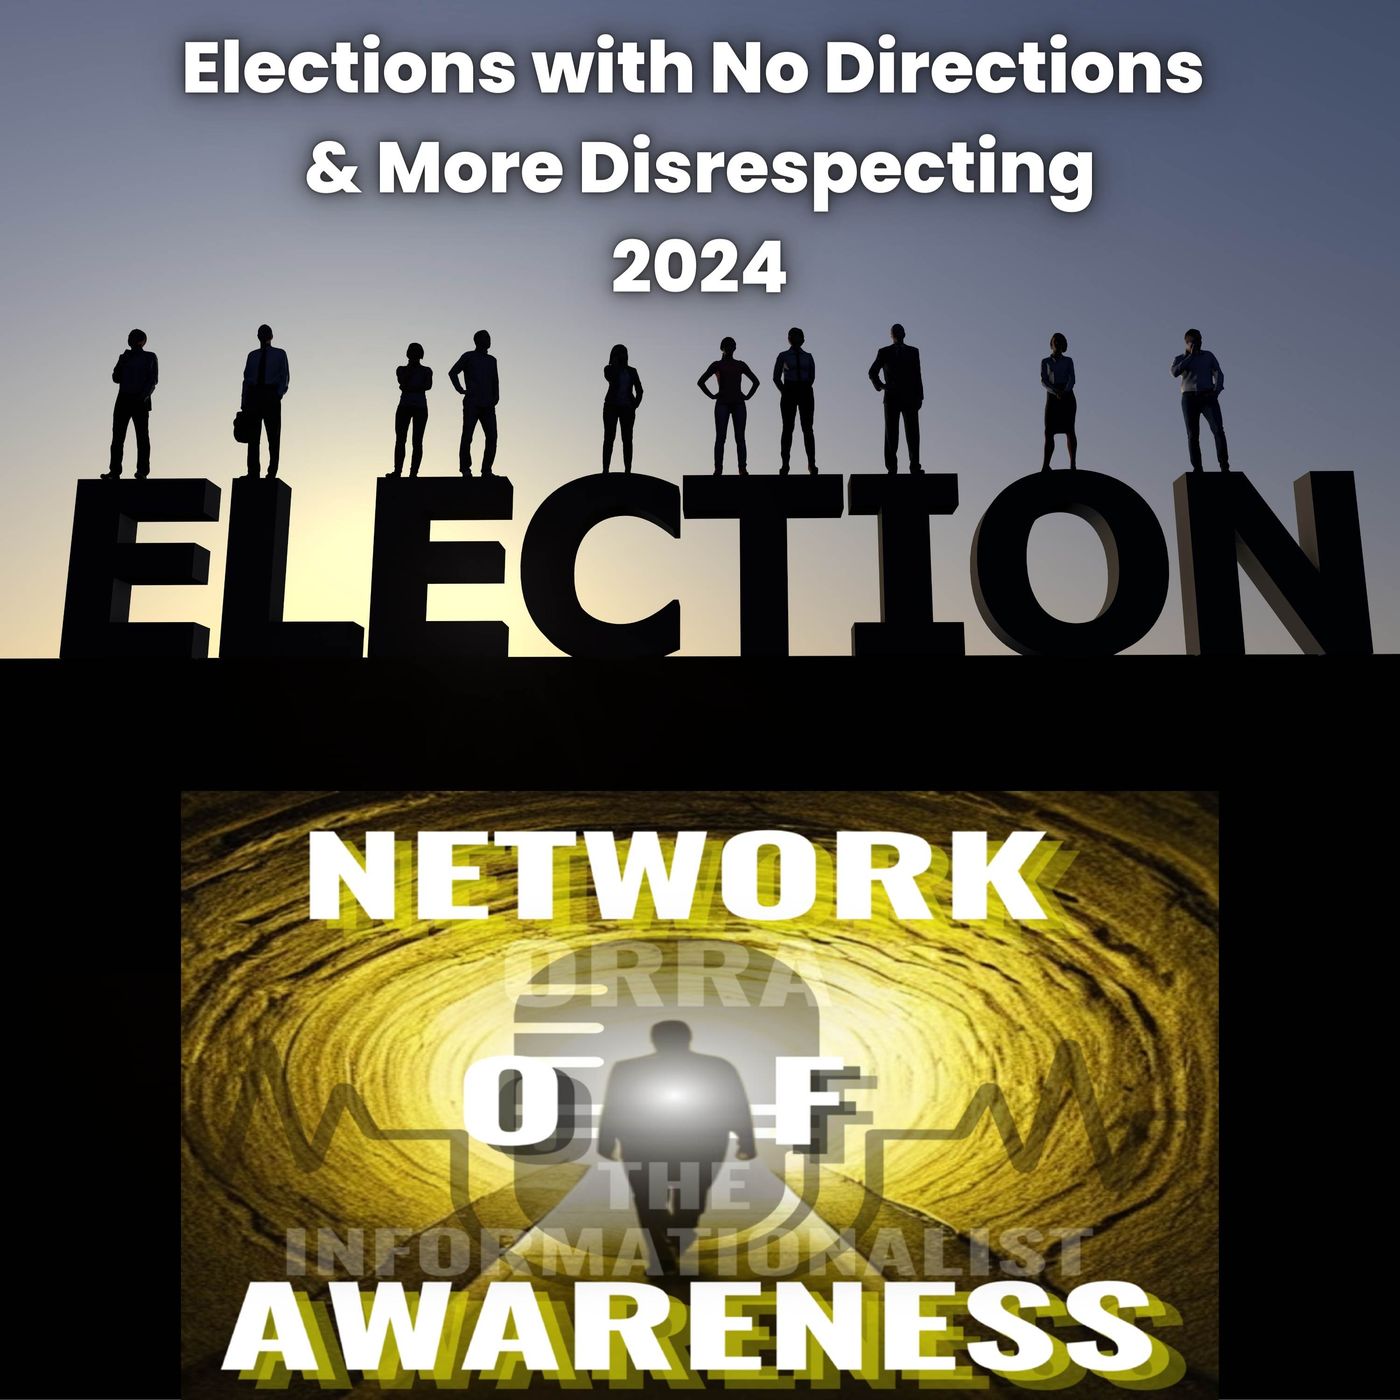 Elections with No Directions & More Disrespecting